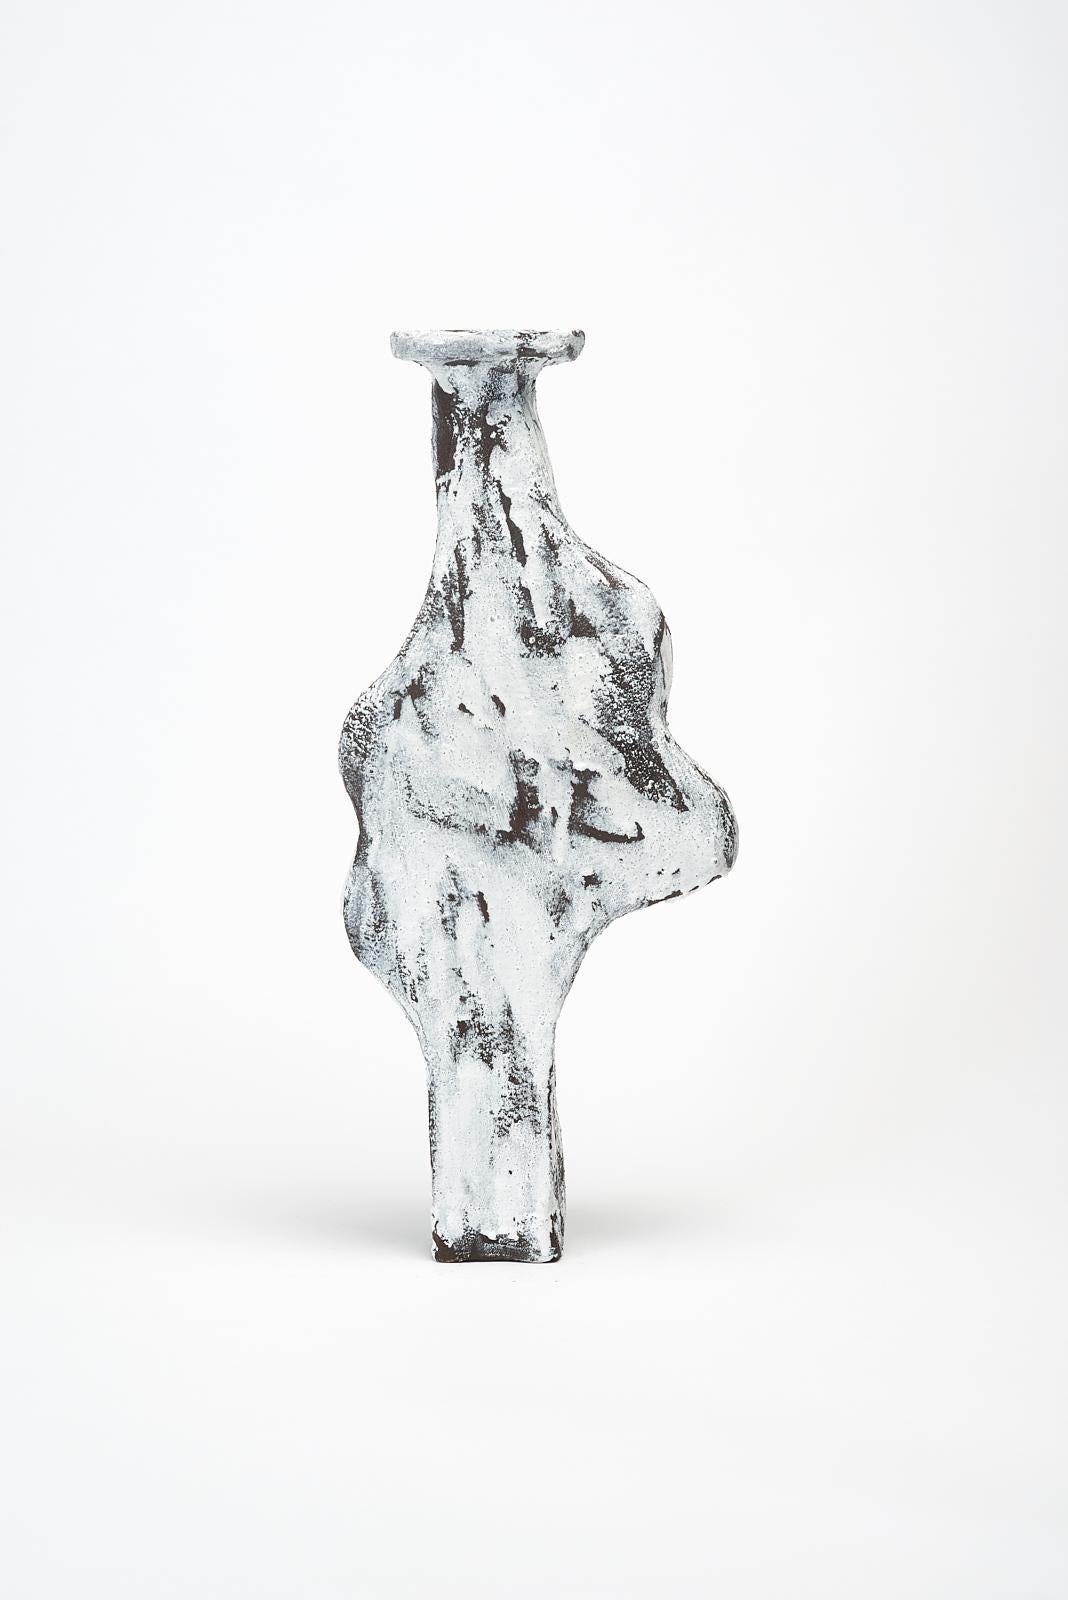 Geta Vase by Willem Van hooff
Core vessel Series
Dimensions: W 15 x H 39 cm (Dimensions may vary as pieces are hand-made and might present slight variations in sizes)
Materials: Earthenware, ceramic, pigments, glaze.

Core is a series of flat